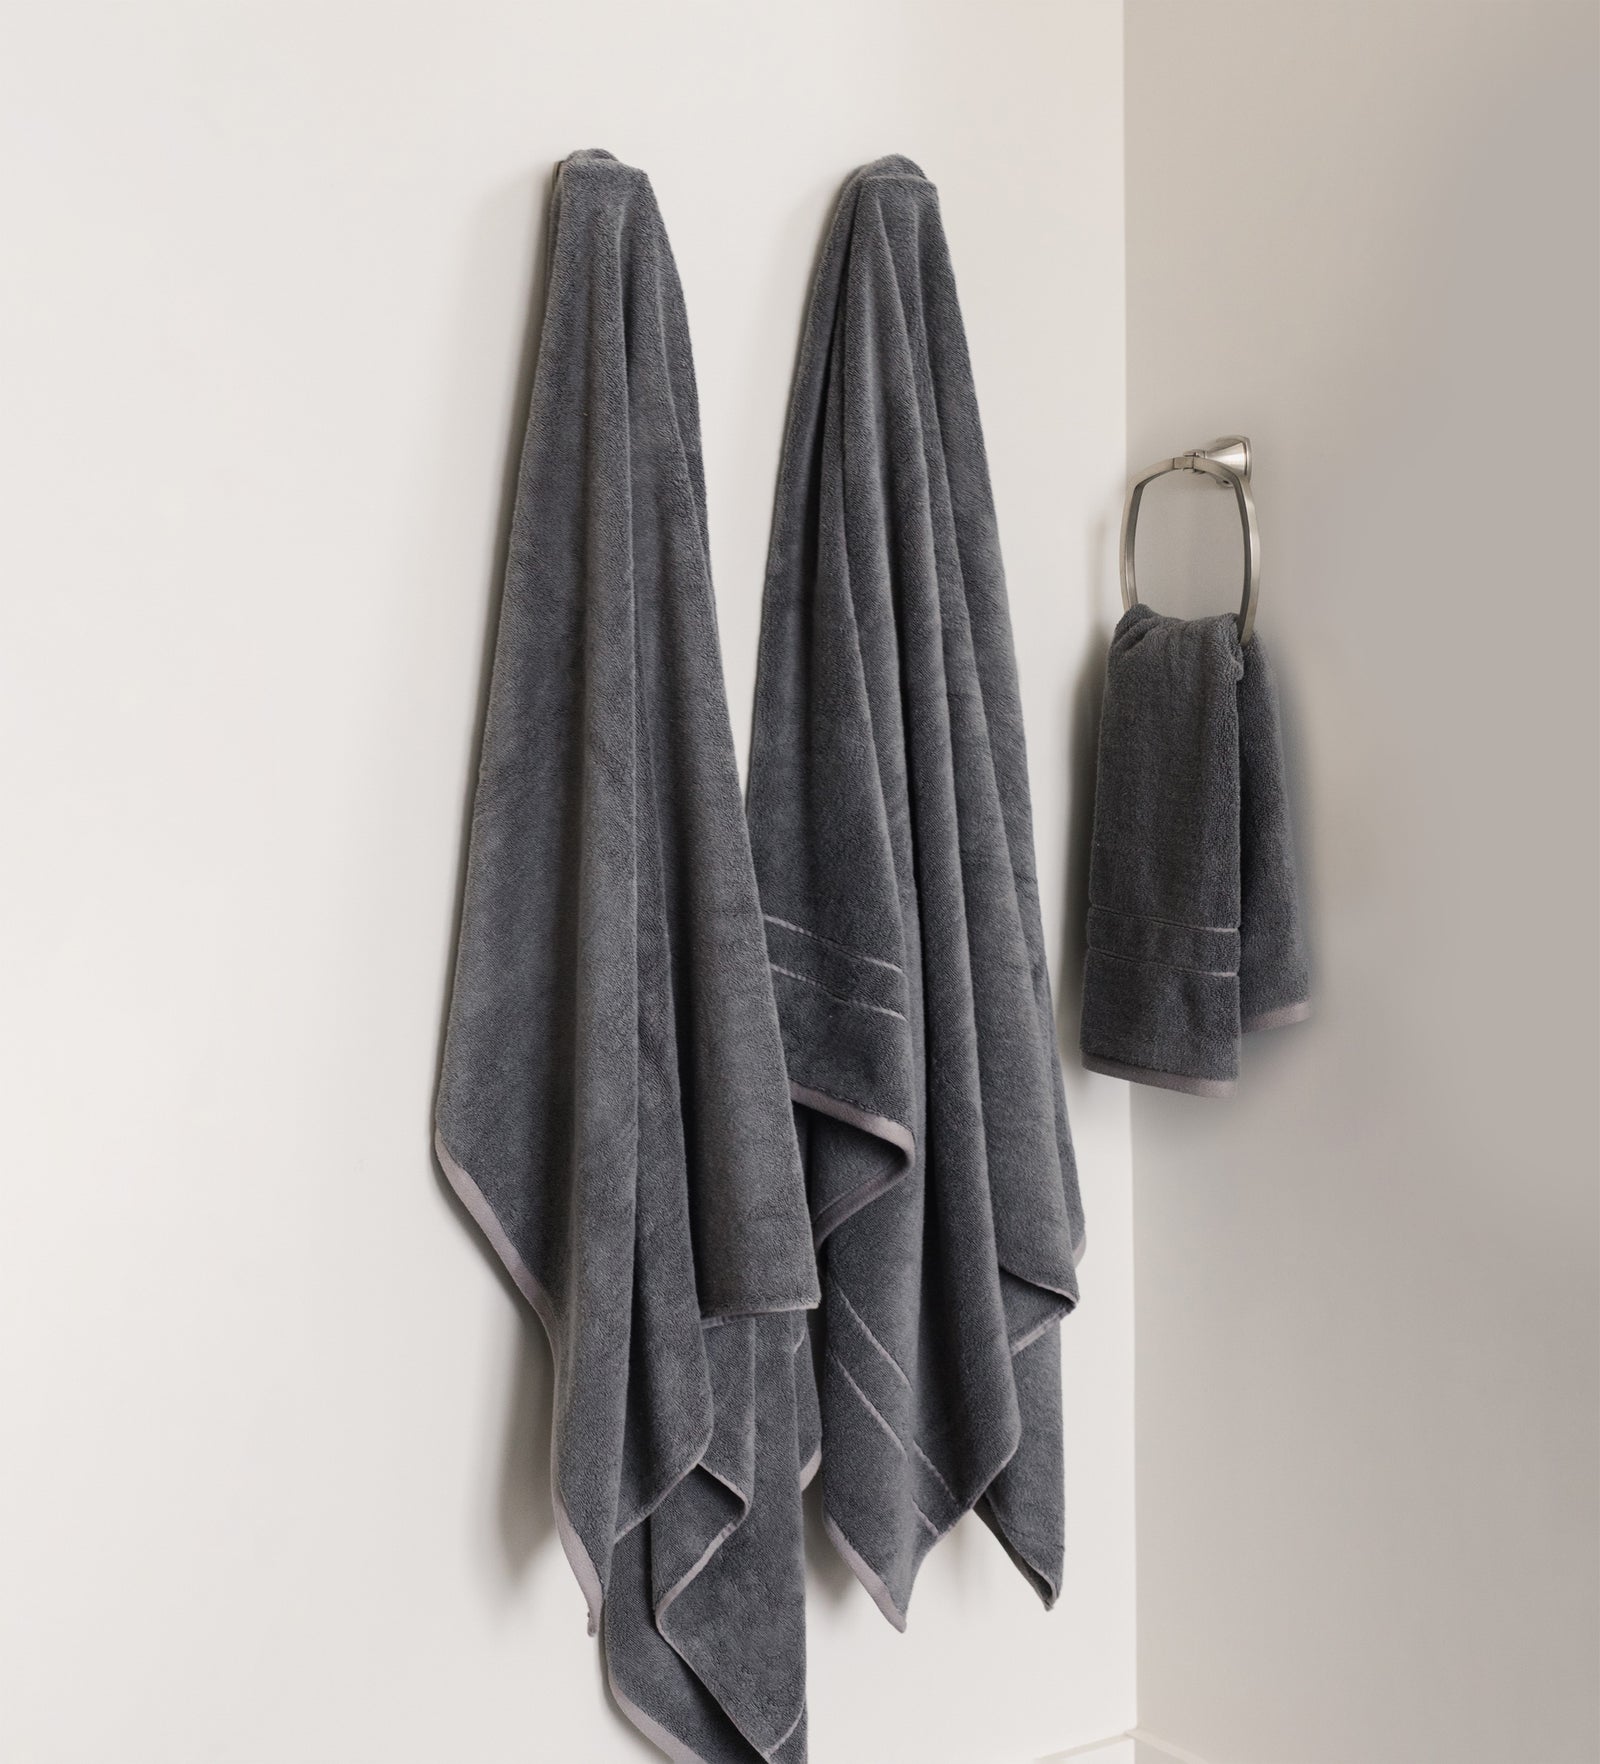 Premium Plush Bath Sheets in the color charcoal. Photo of Premium Plush Bath sheets taken in a bathroom showing the towels which are hung from a towel rack. 